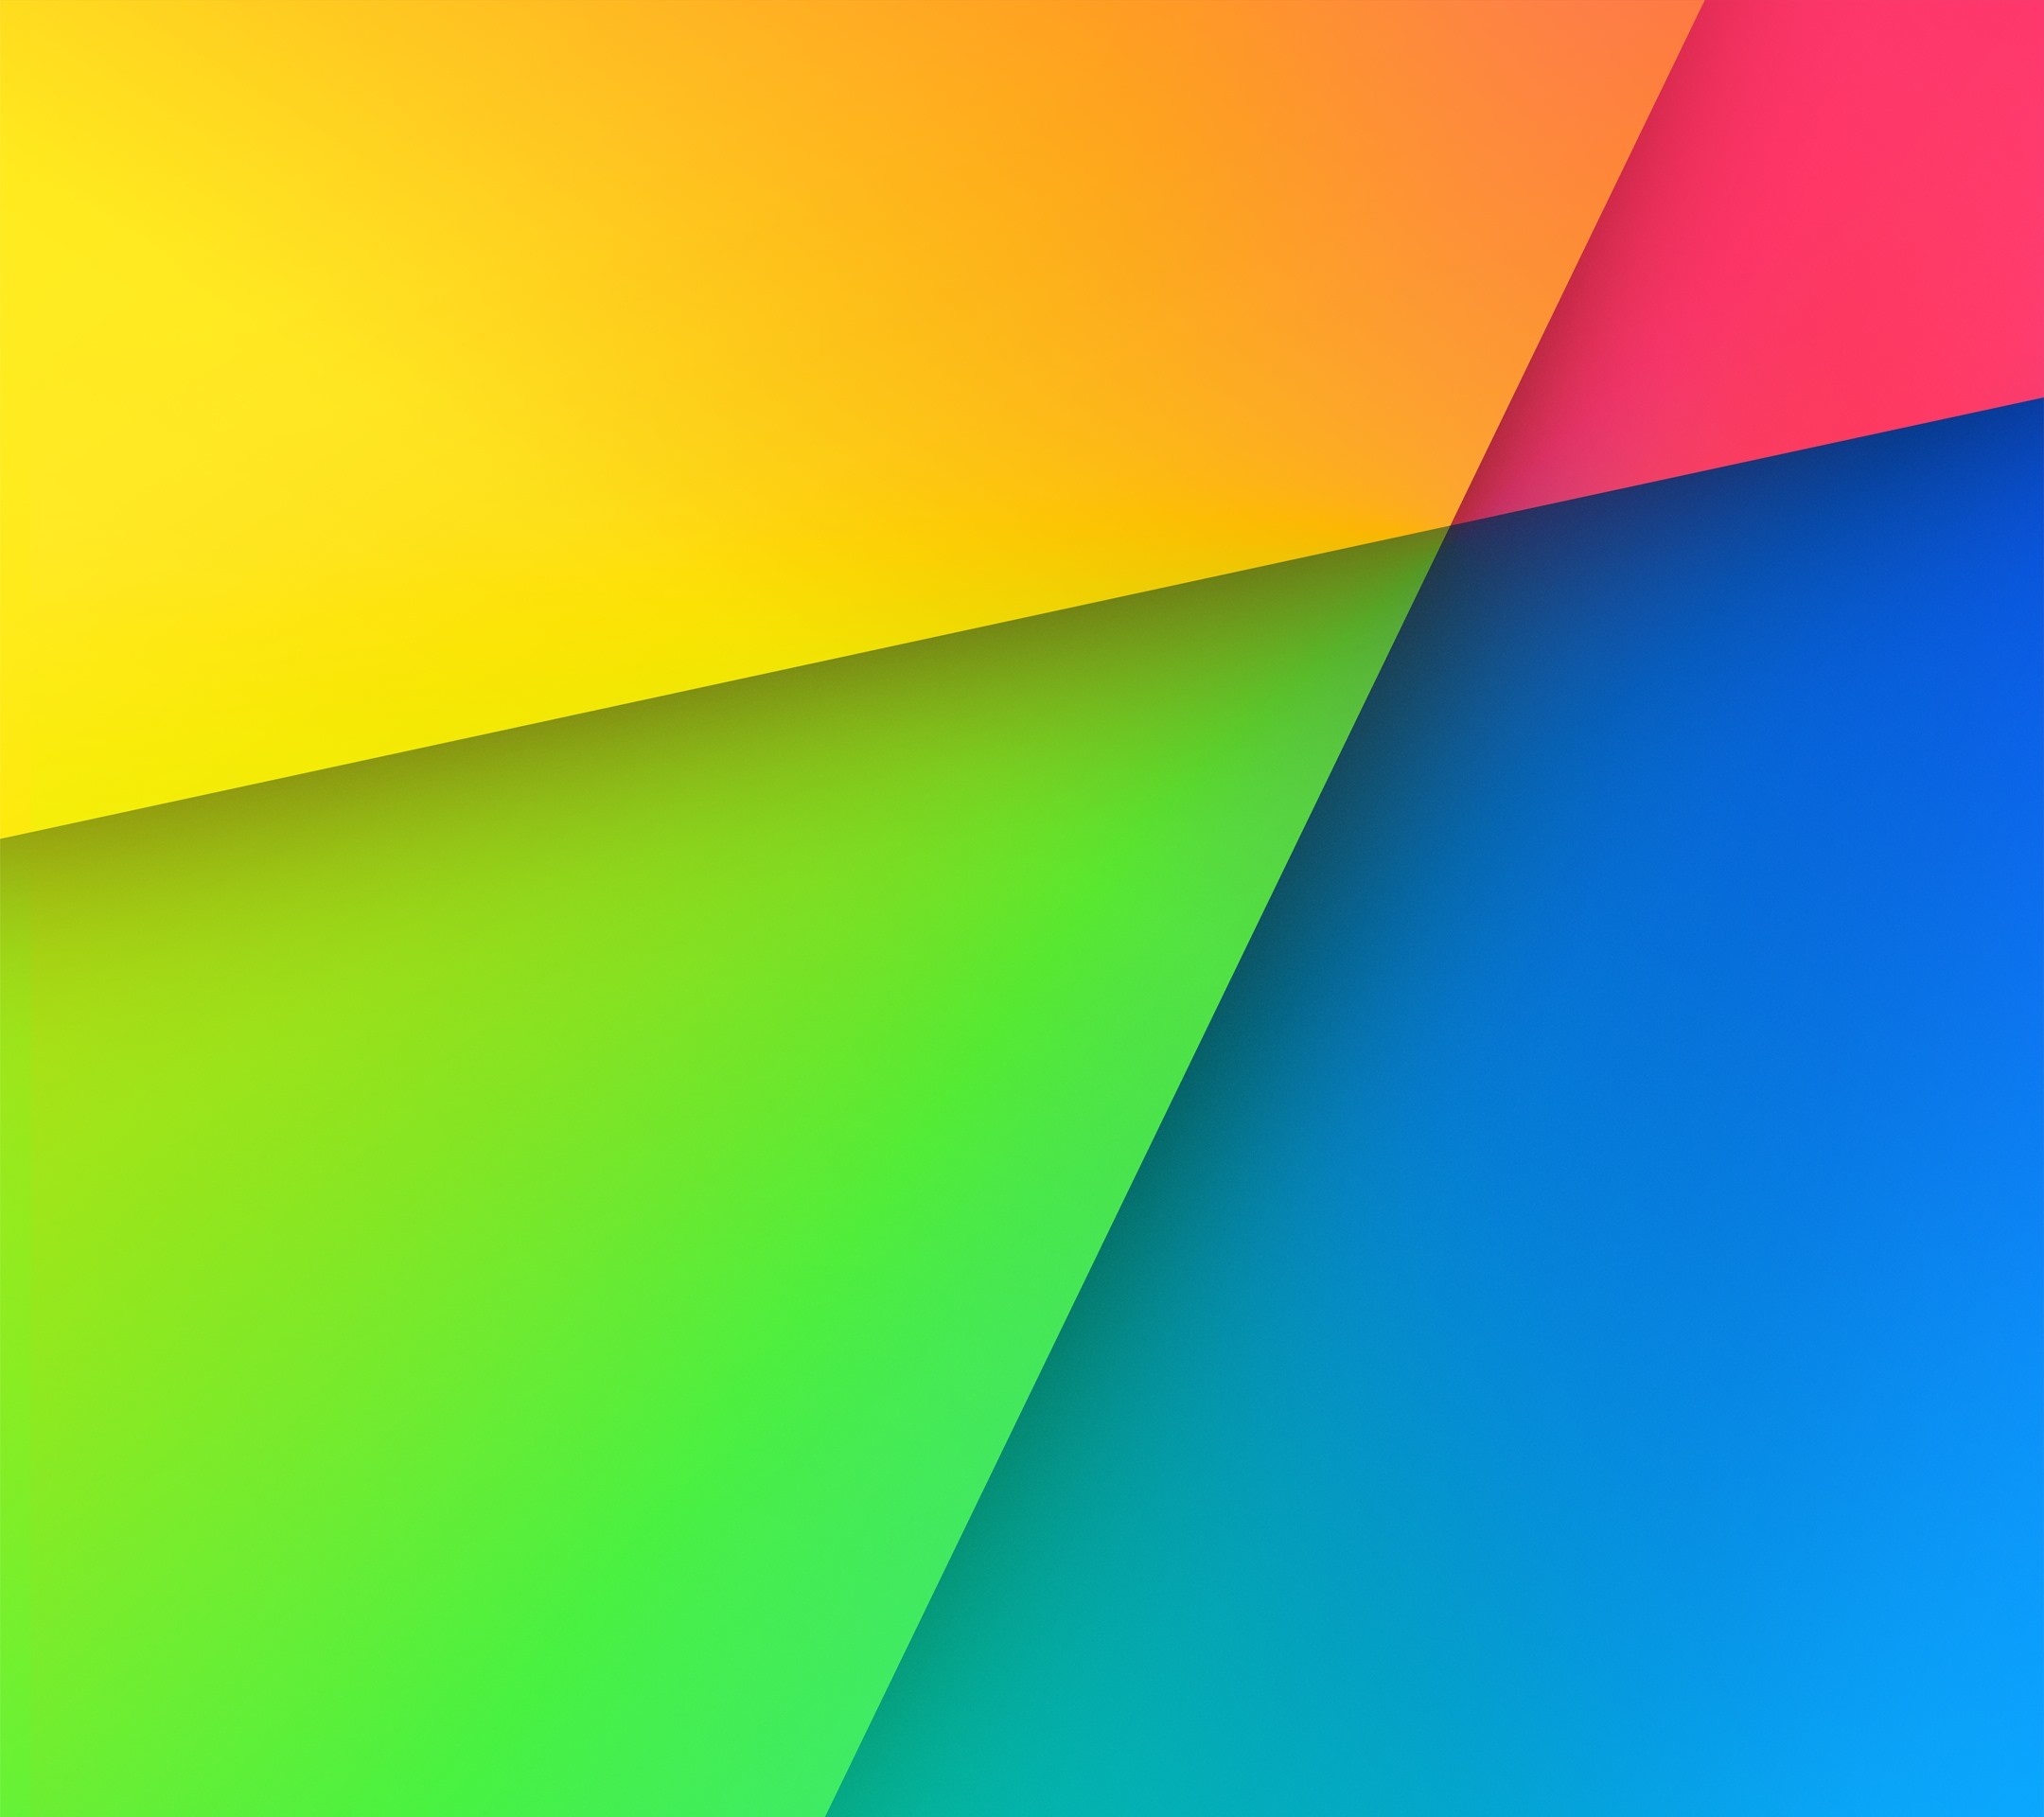 2160x1920 Search Results for “nexus 7 wallpaper” – Adorable Wallpapers